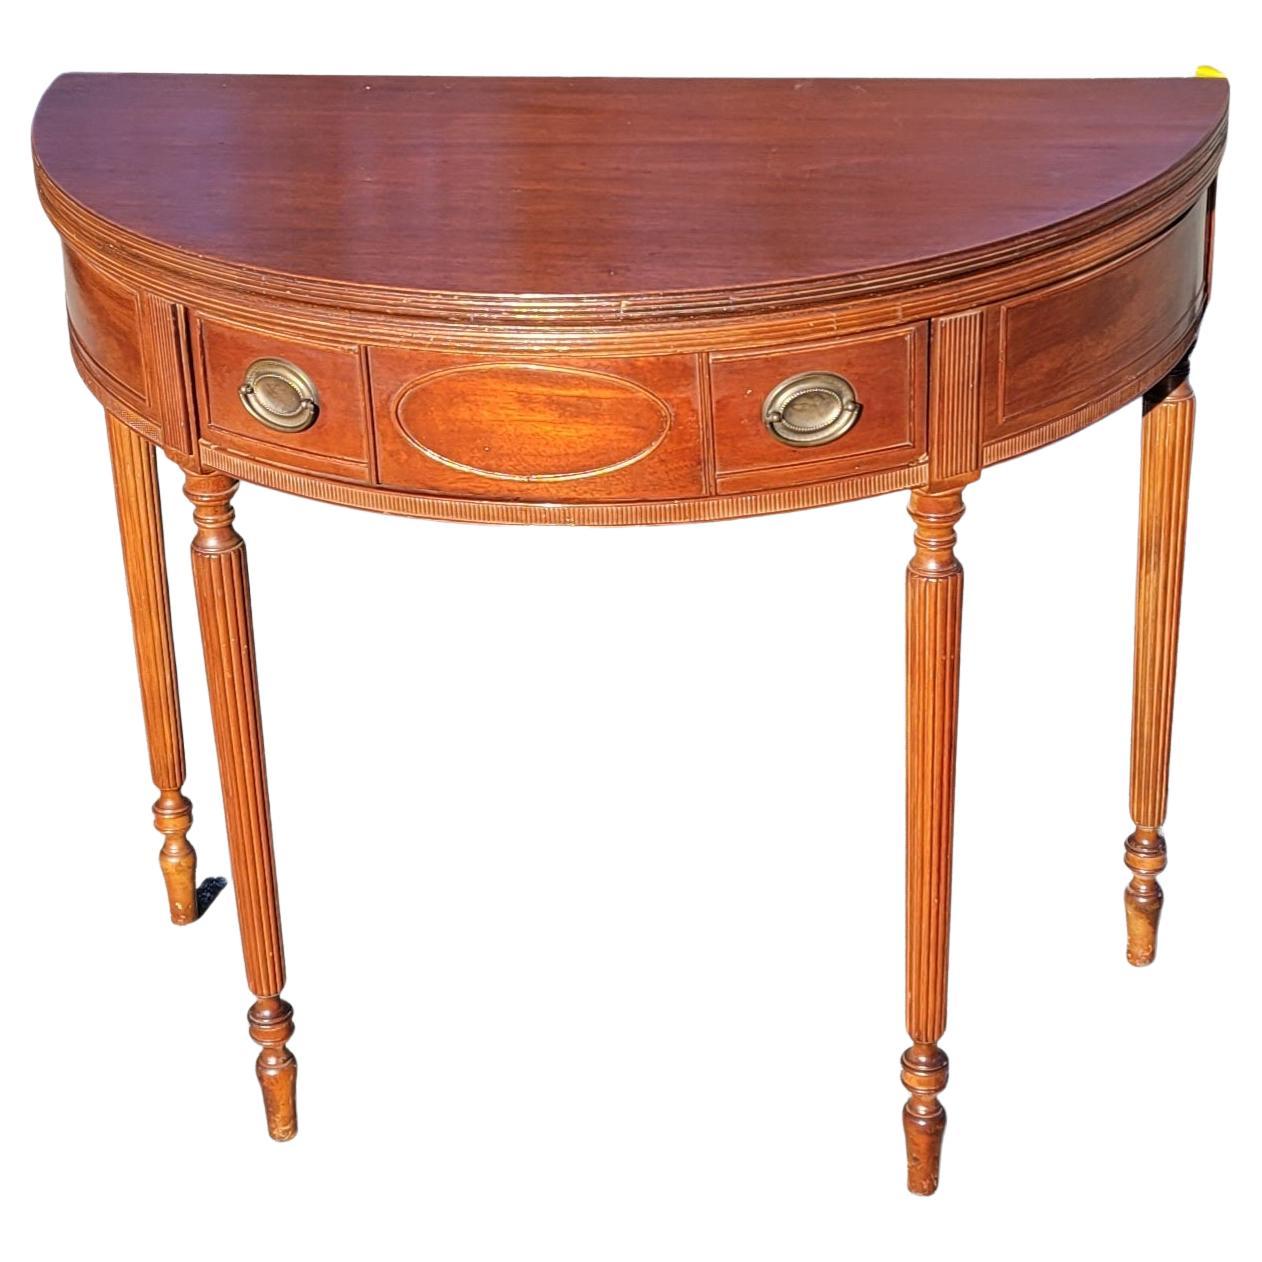 Brass 19th Century Federal Hepplewhite Mahogany Demi-Lune Flip-Top Console Card Table For Sale